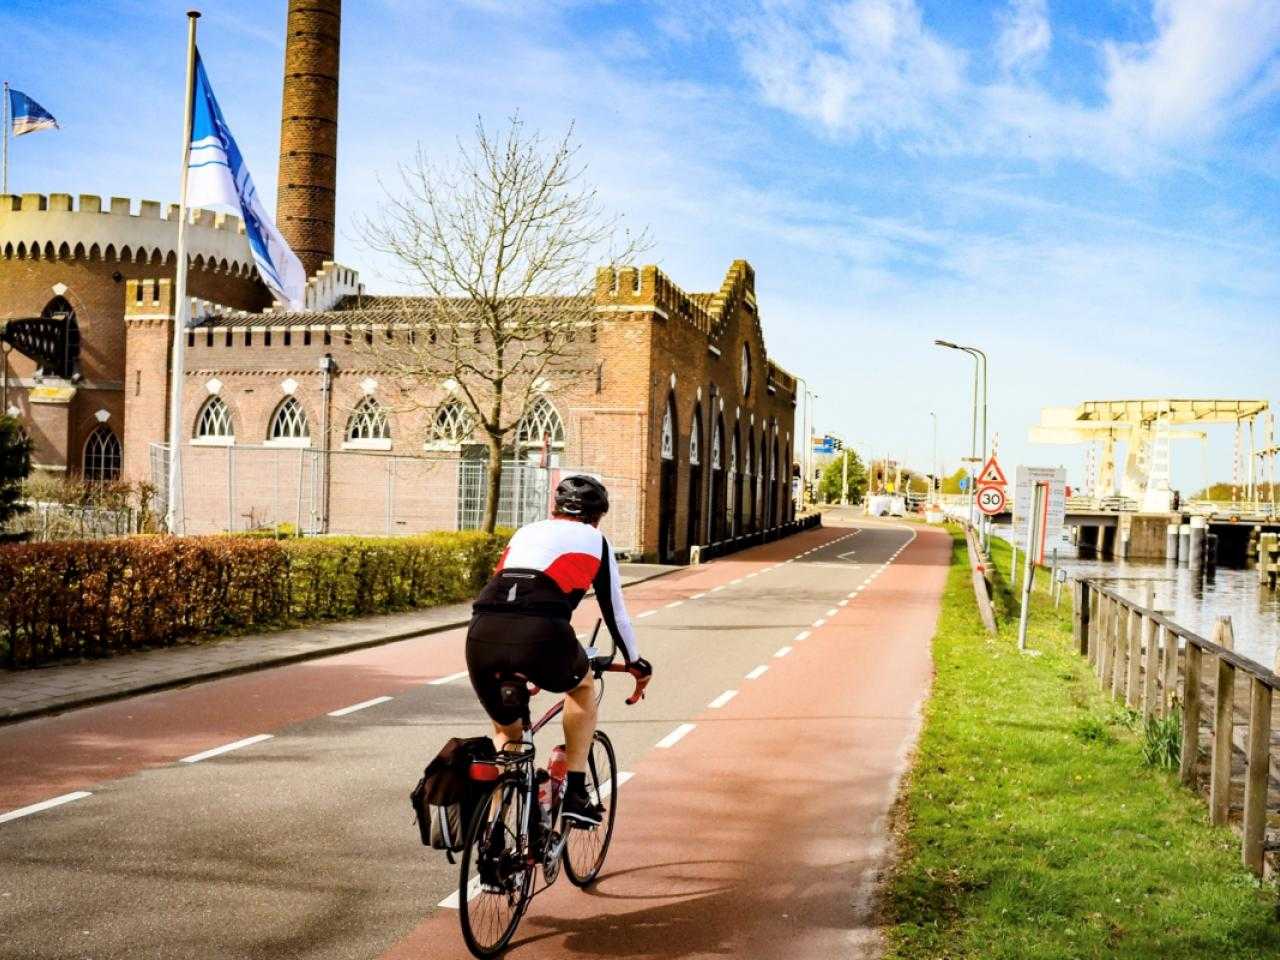 Cyclist in front of Cruquius pumping station.